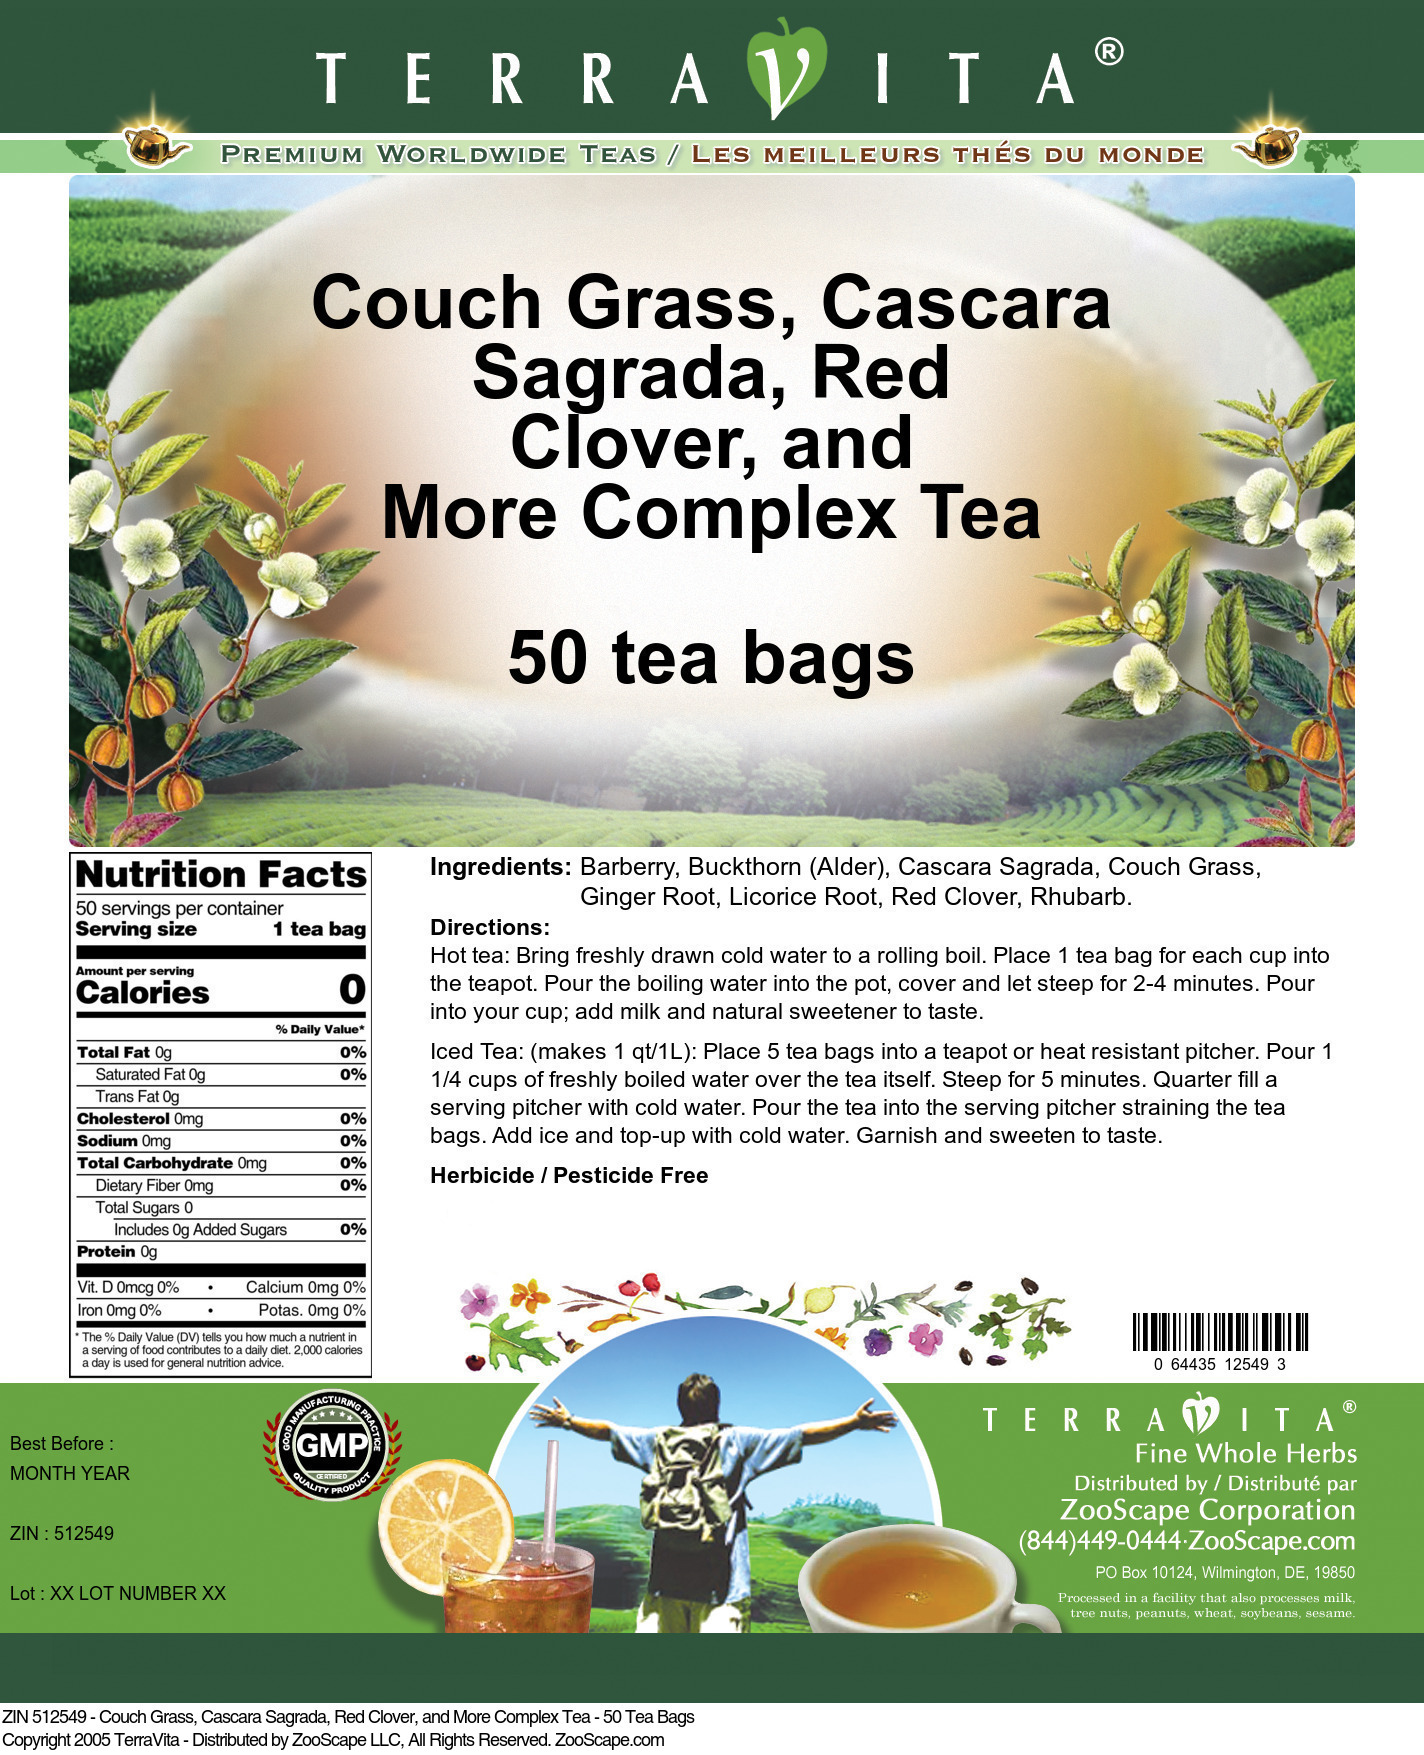 Couch Grass, Cascara Sagrada, Red Clover, and More Complex Tea - Label